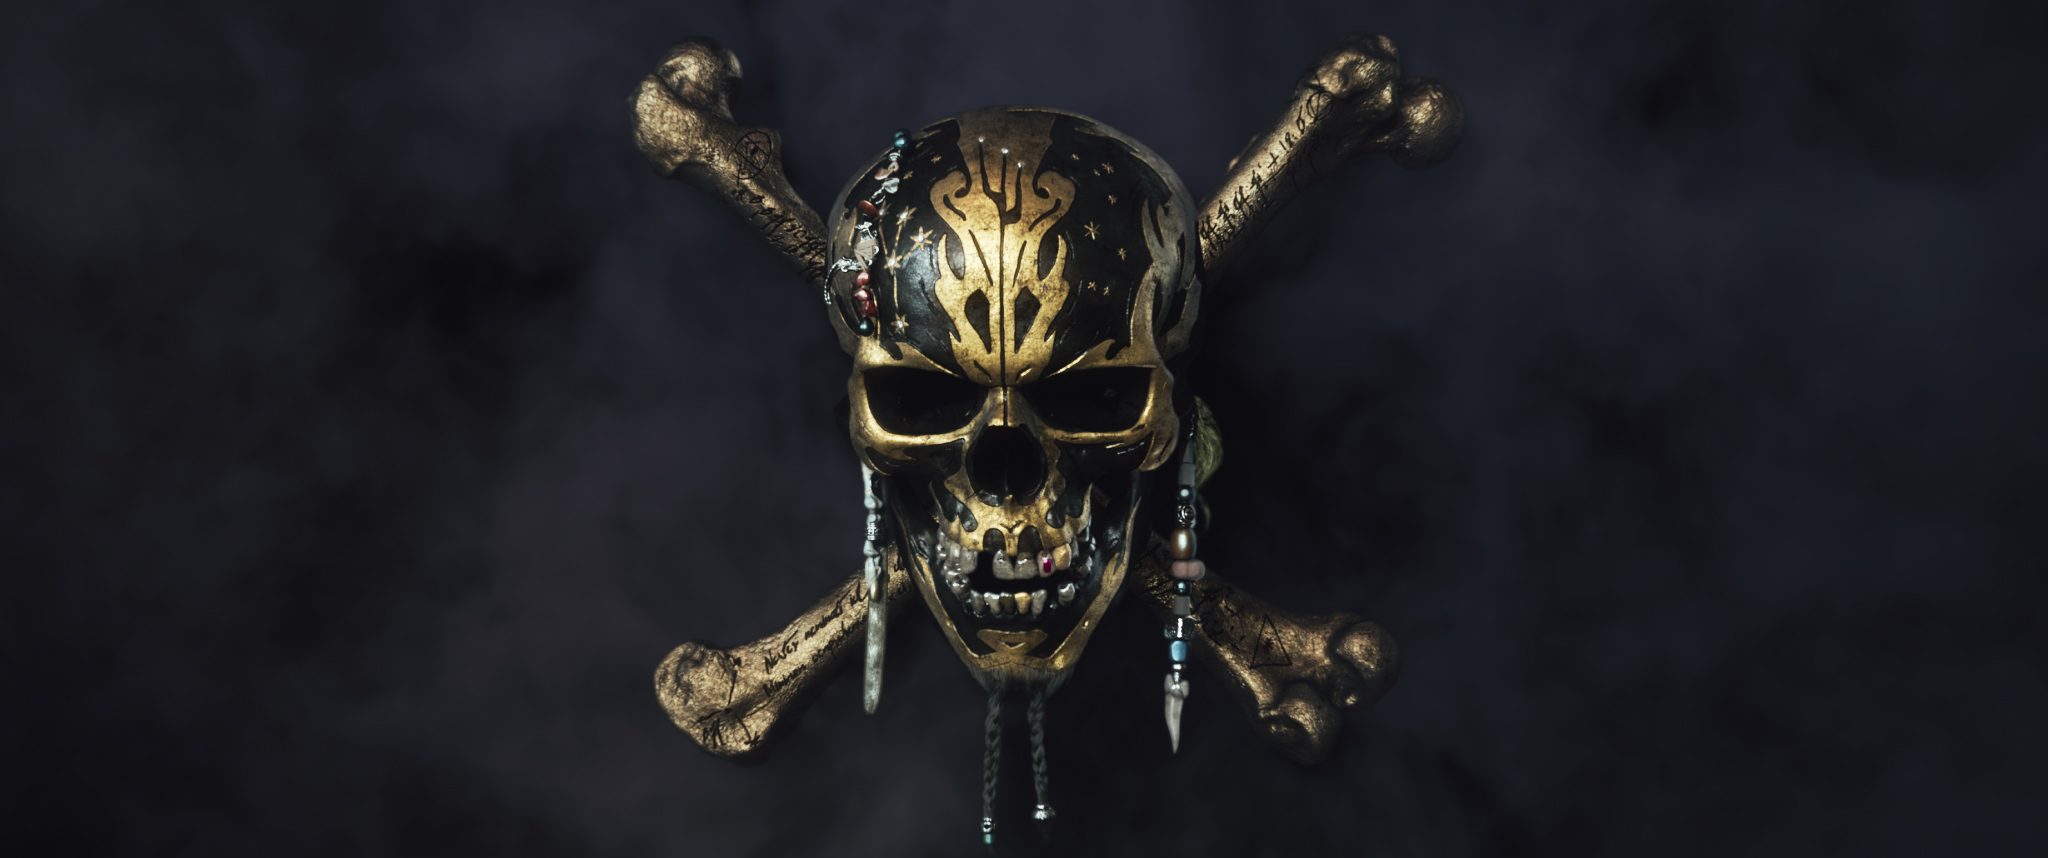 Pirates of the Caribbean: Dead Man’s free downloads